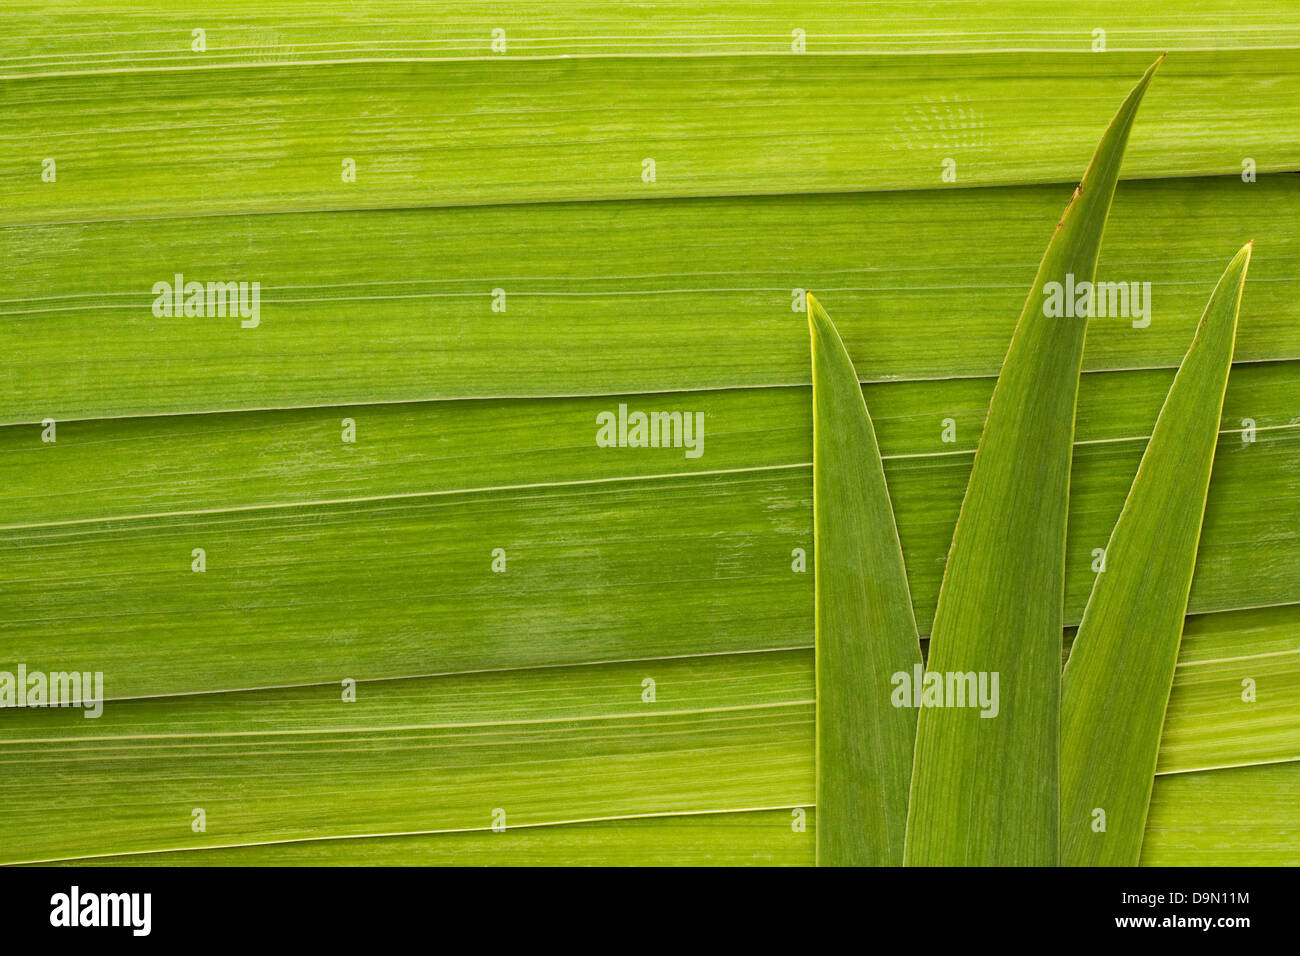 Long palm leaf detail background great symbol for tropical forests or travel to the tropics Stock Photo